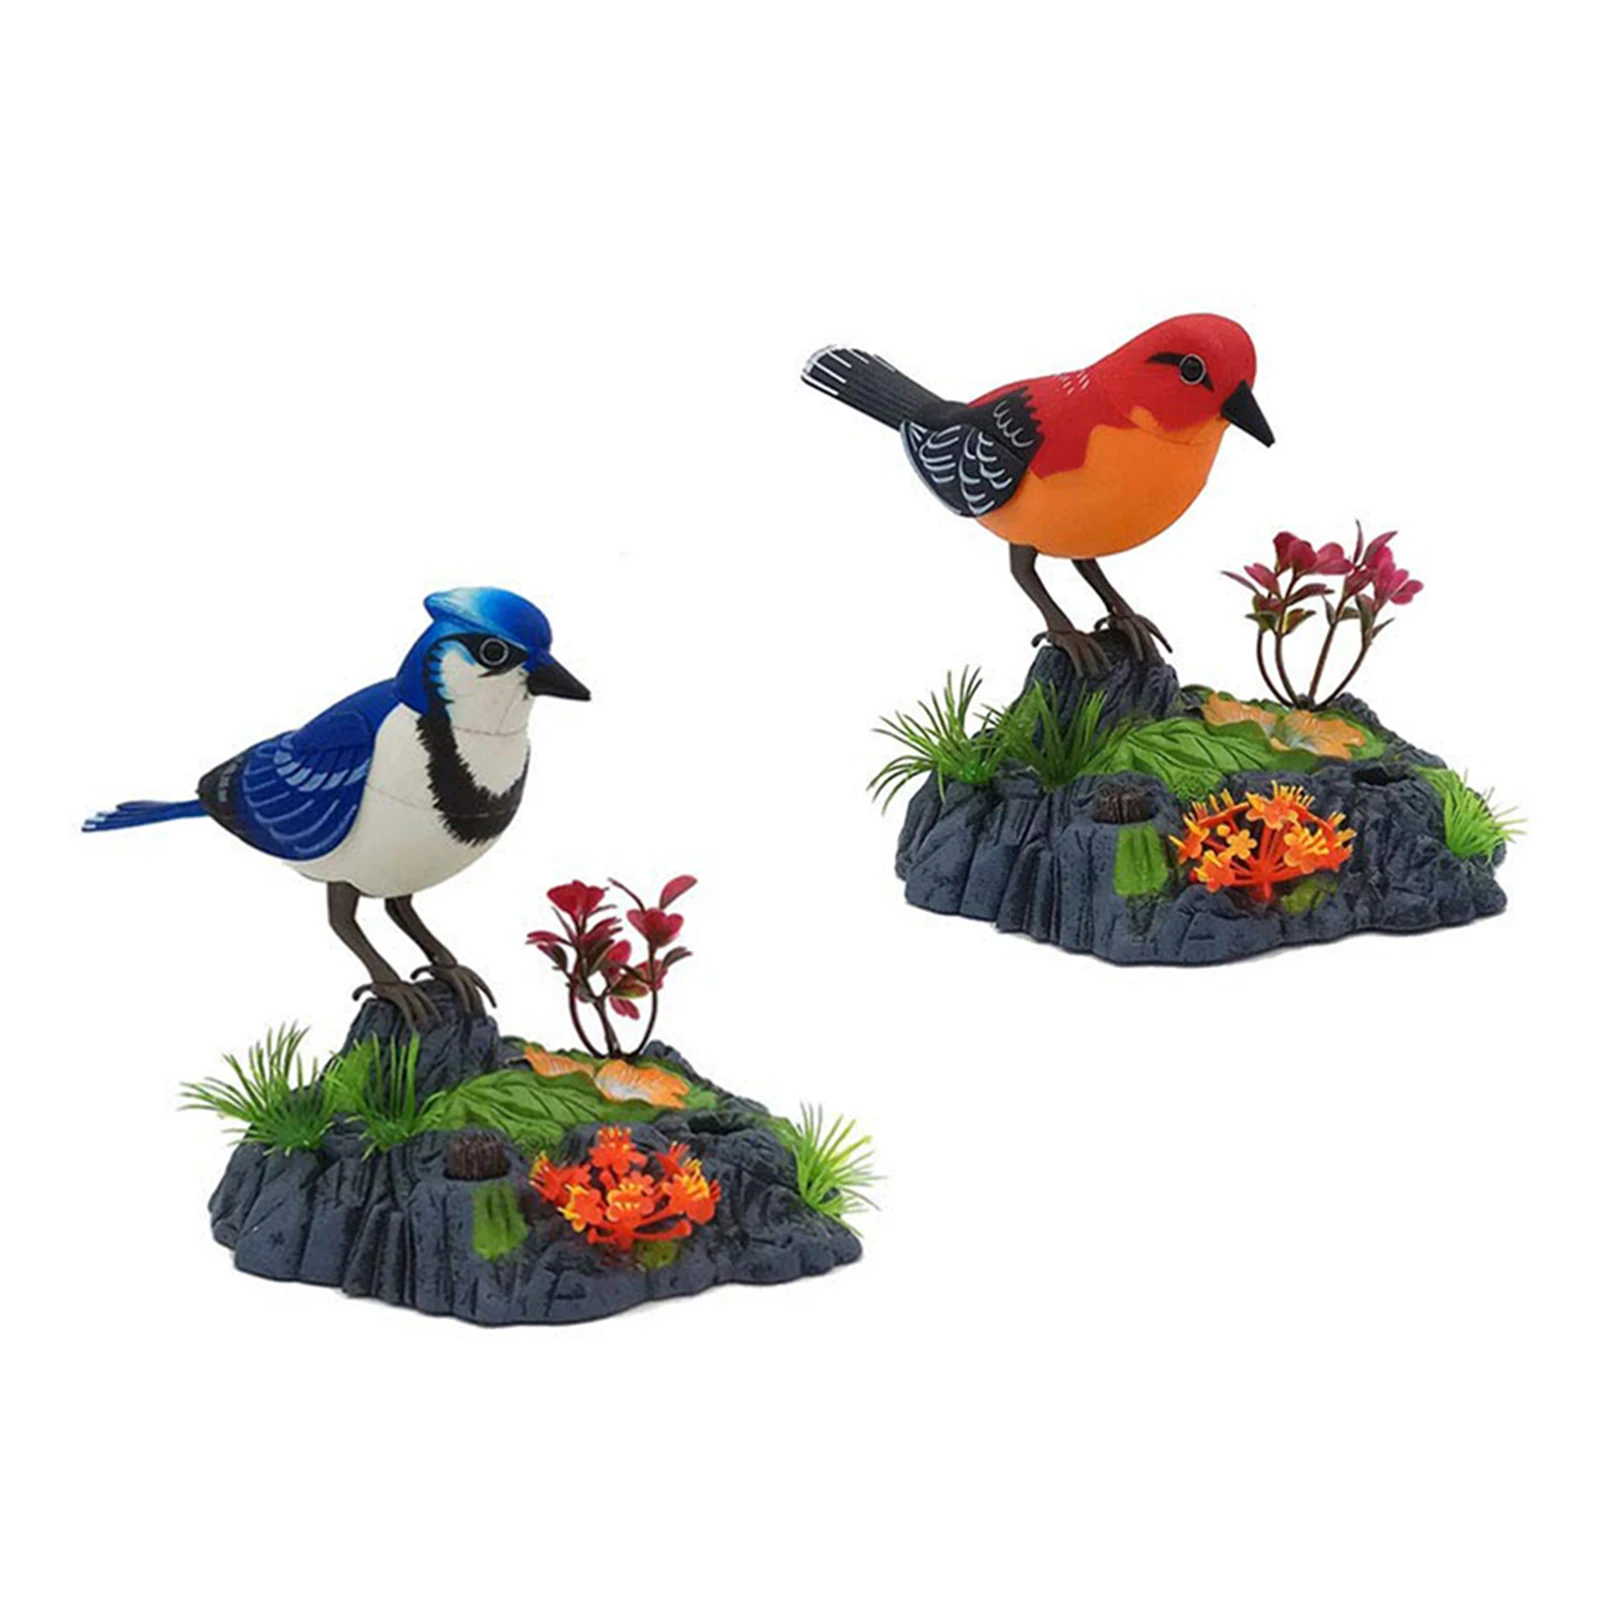 Plastic Voice Control Bird Toy Talking Moving Chirping Bird Festival Perfect Home Bedroom Decoration Education Toy for Children